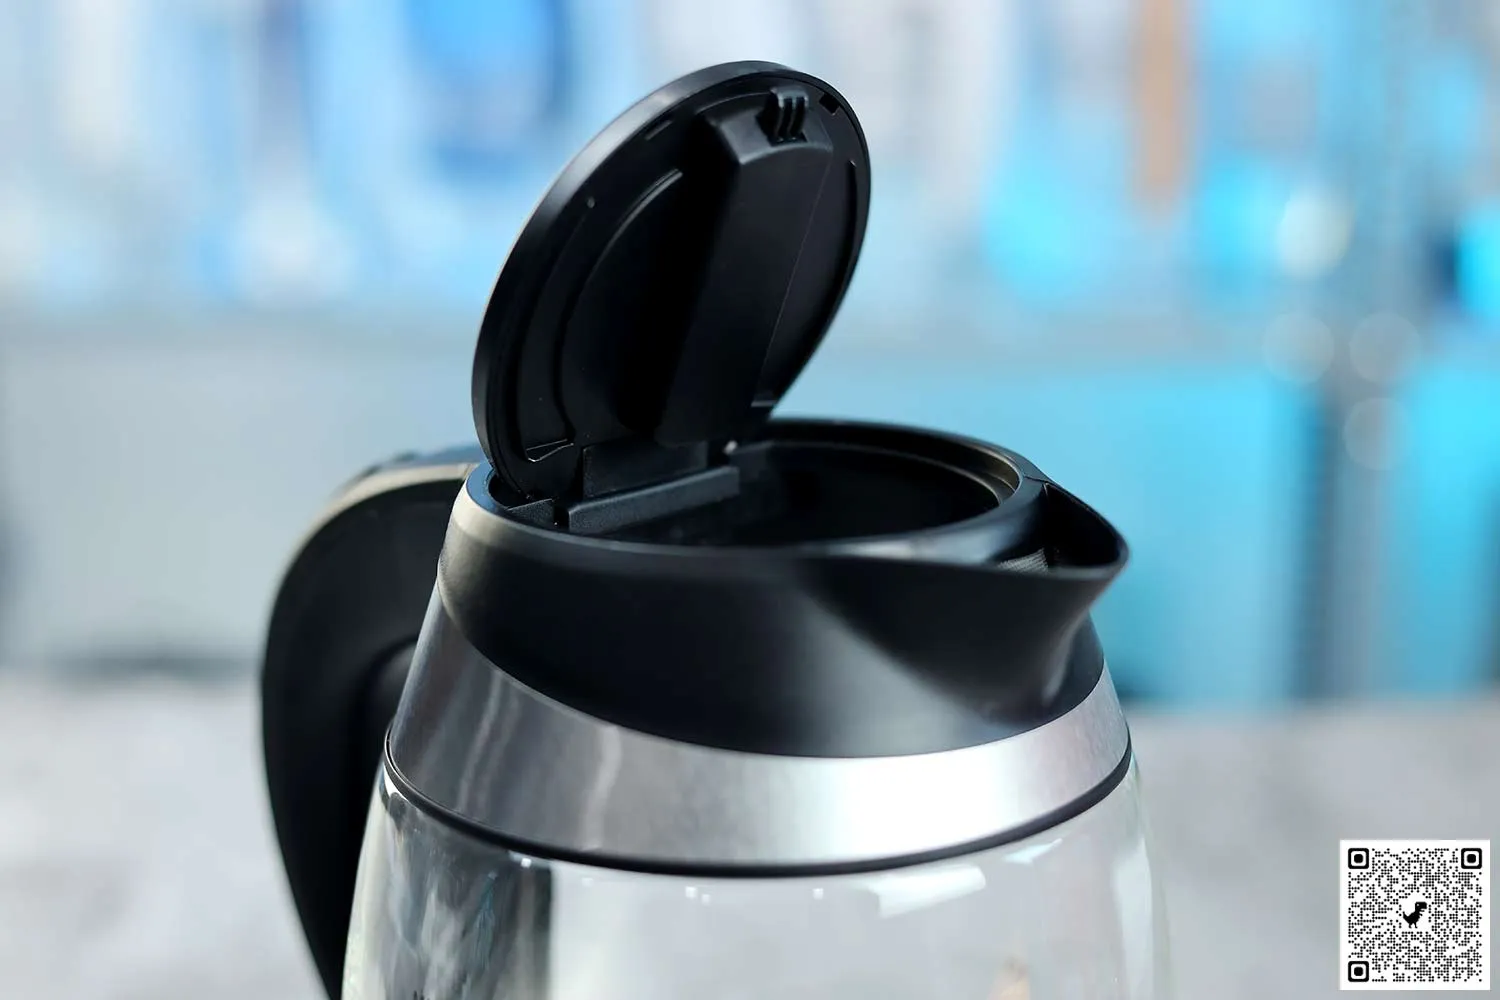 How to Use Mueller Ultra Electric Kettle? 